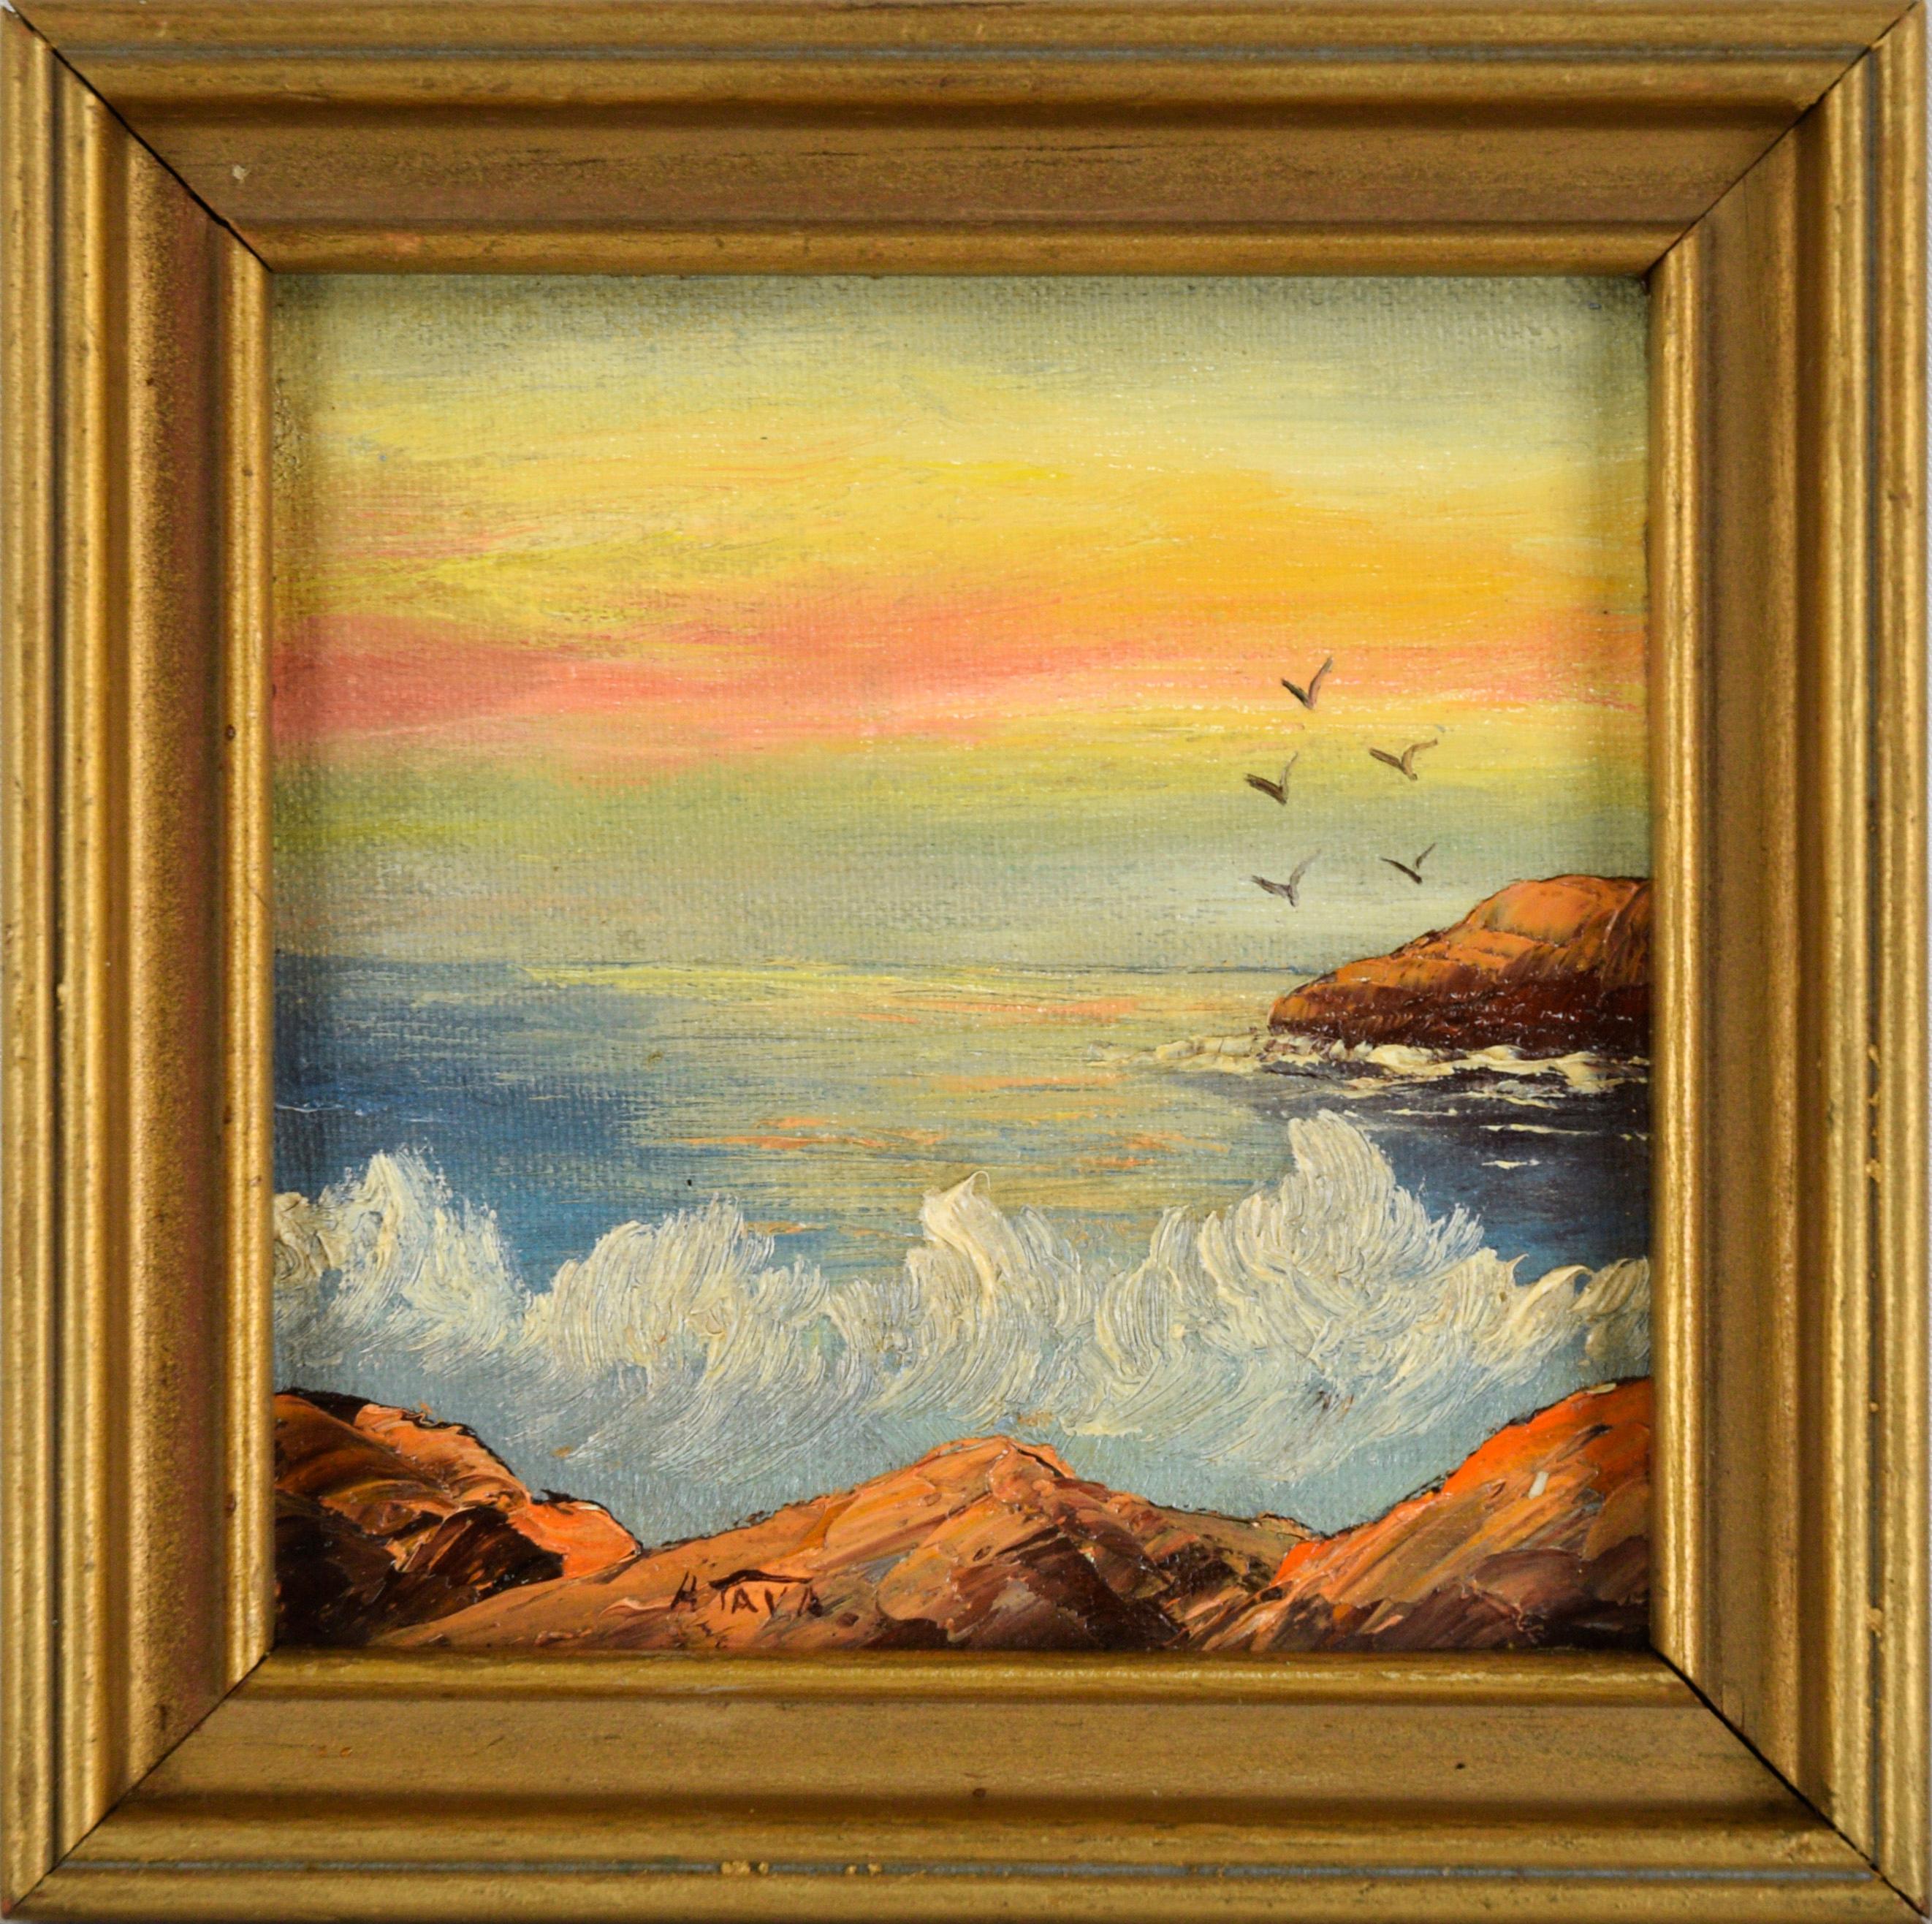 Unknown Landscape Painting - Ocean Splash at Sunset - Small Plein Air Oil Painting on Canvas